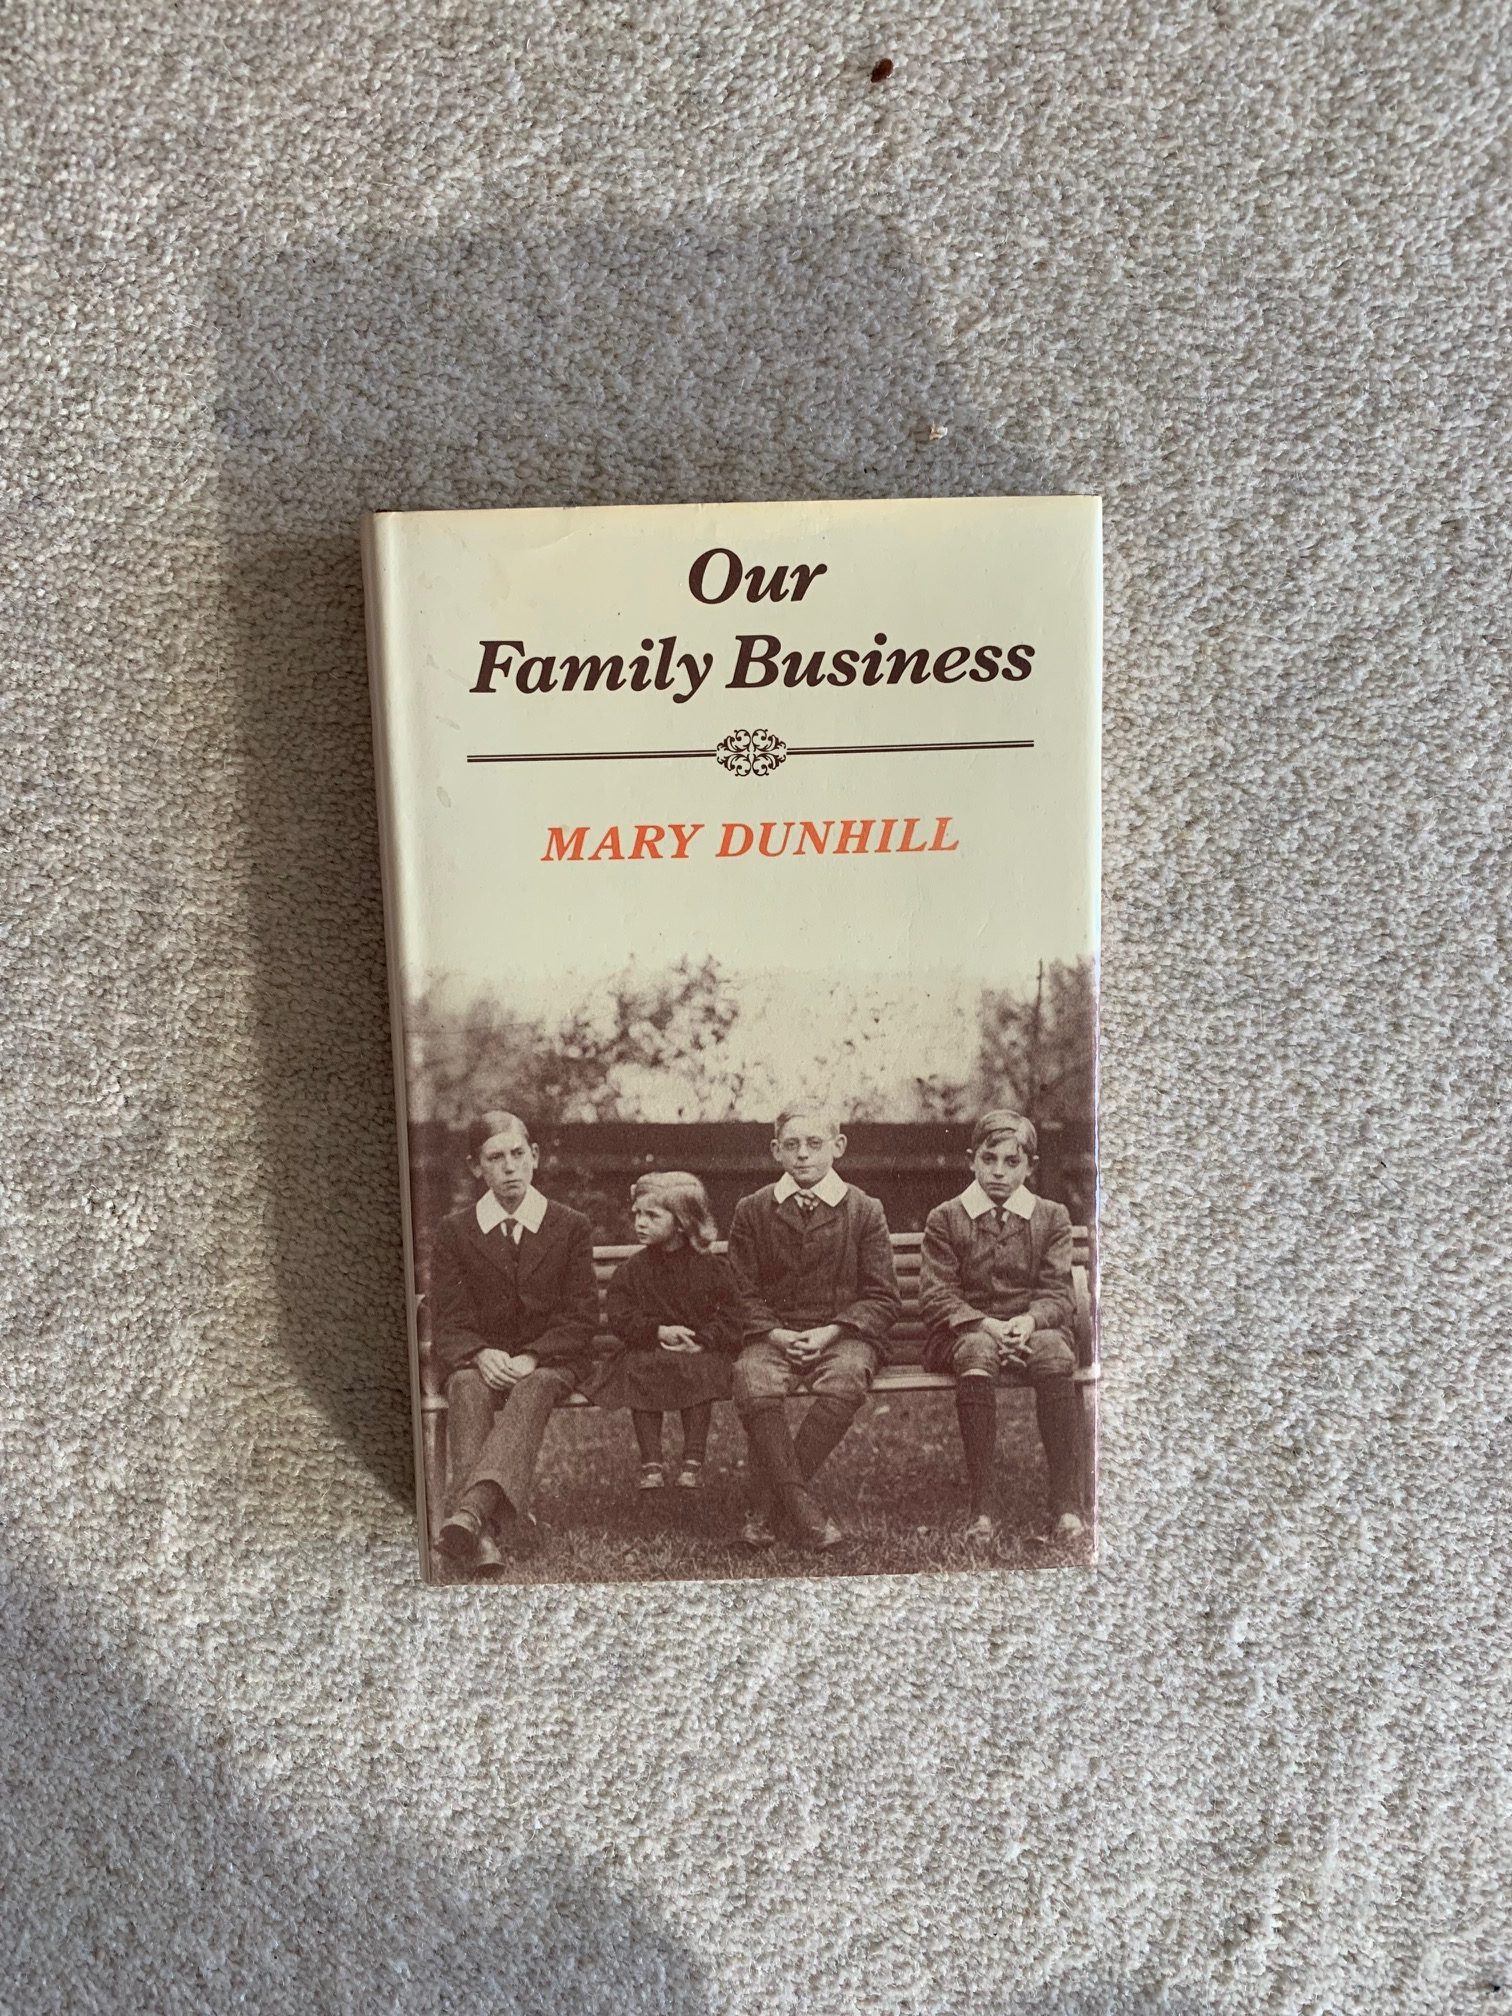 Our Family Business - Mary Dunhill Image